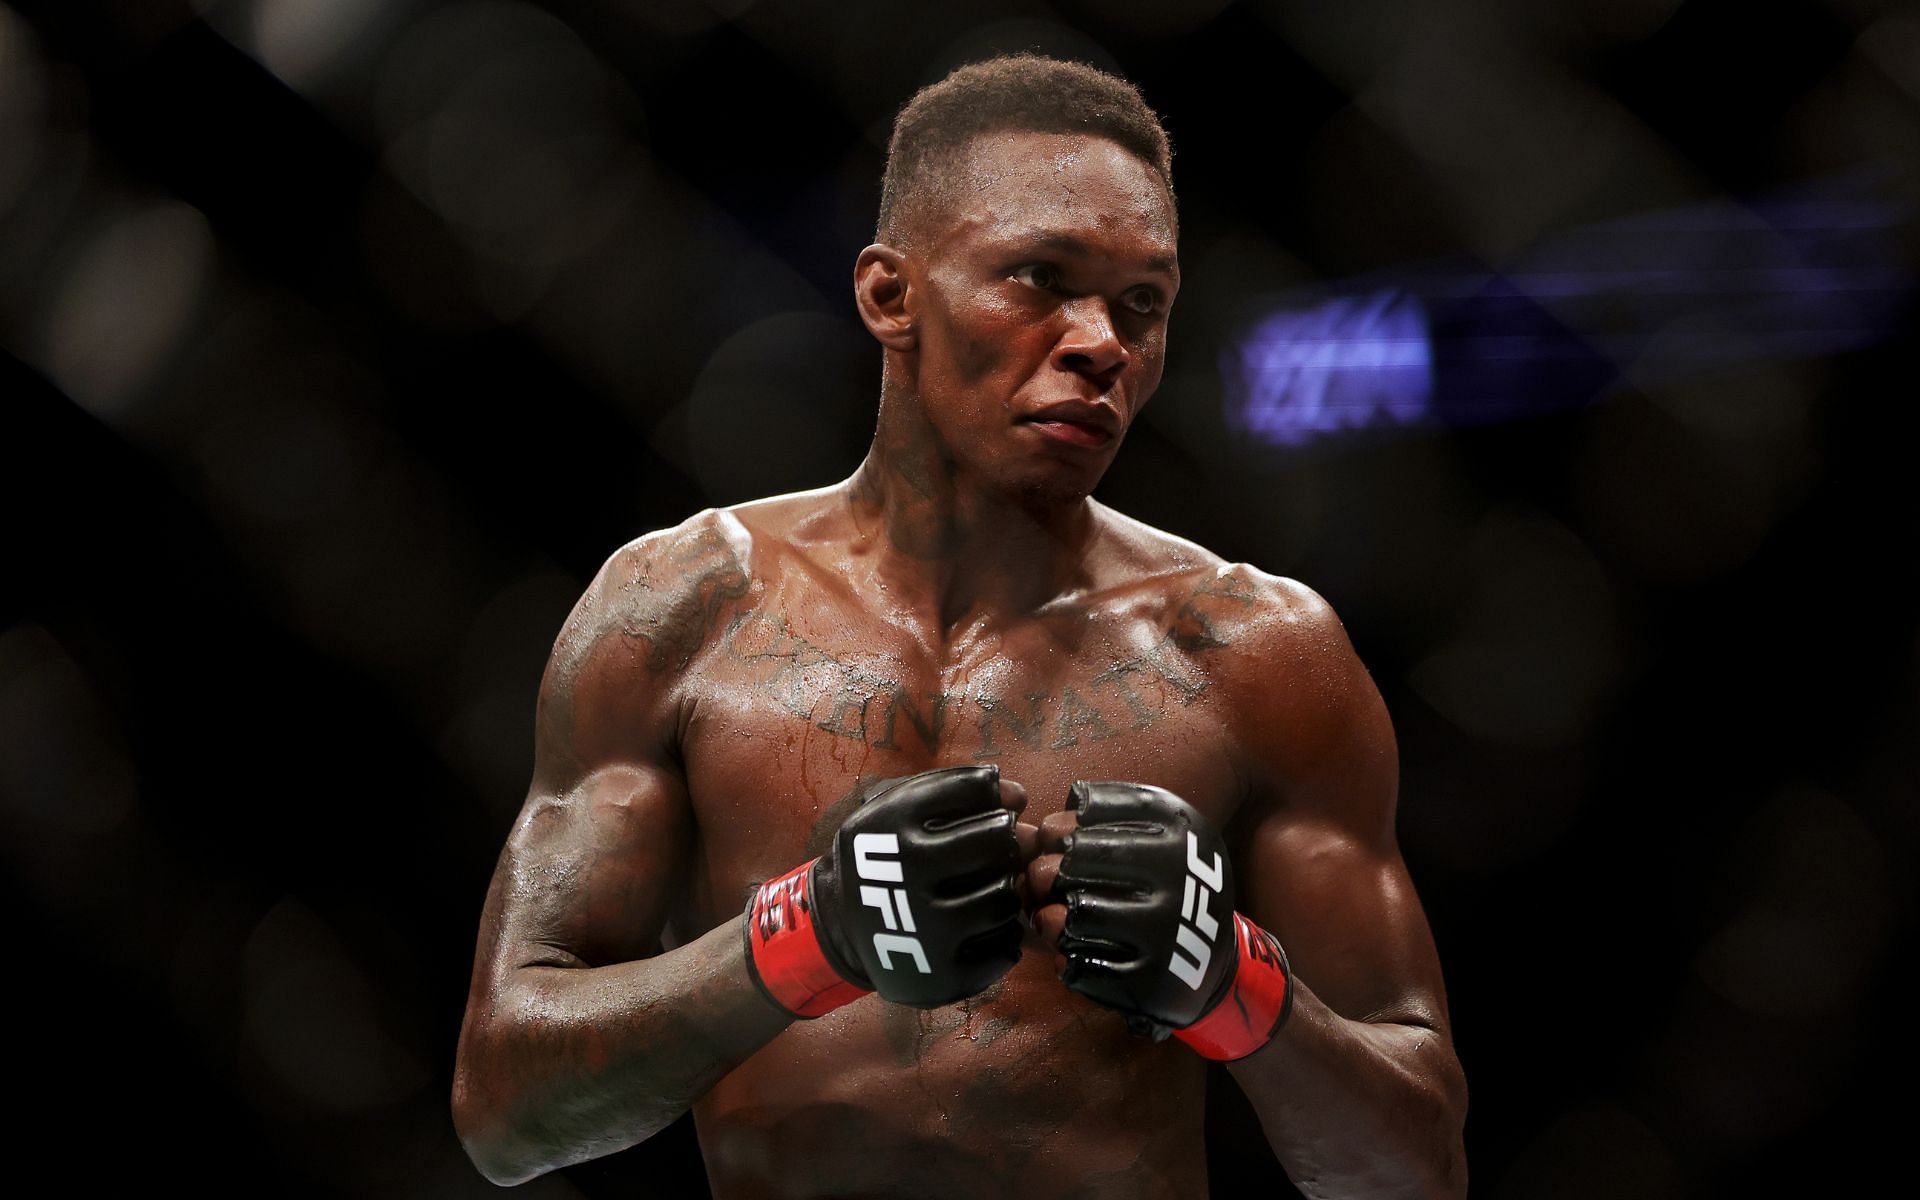 Israel Adesanya at his UFC 271 fight against Robert Whittaker